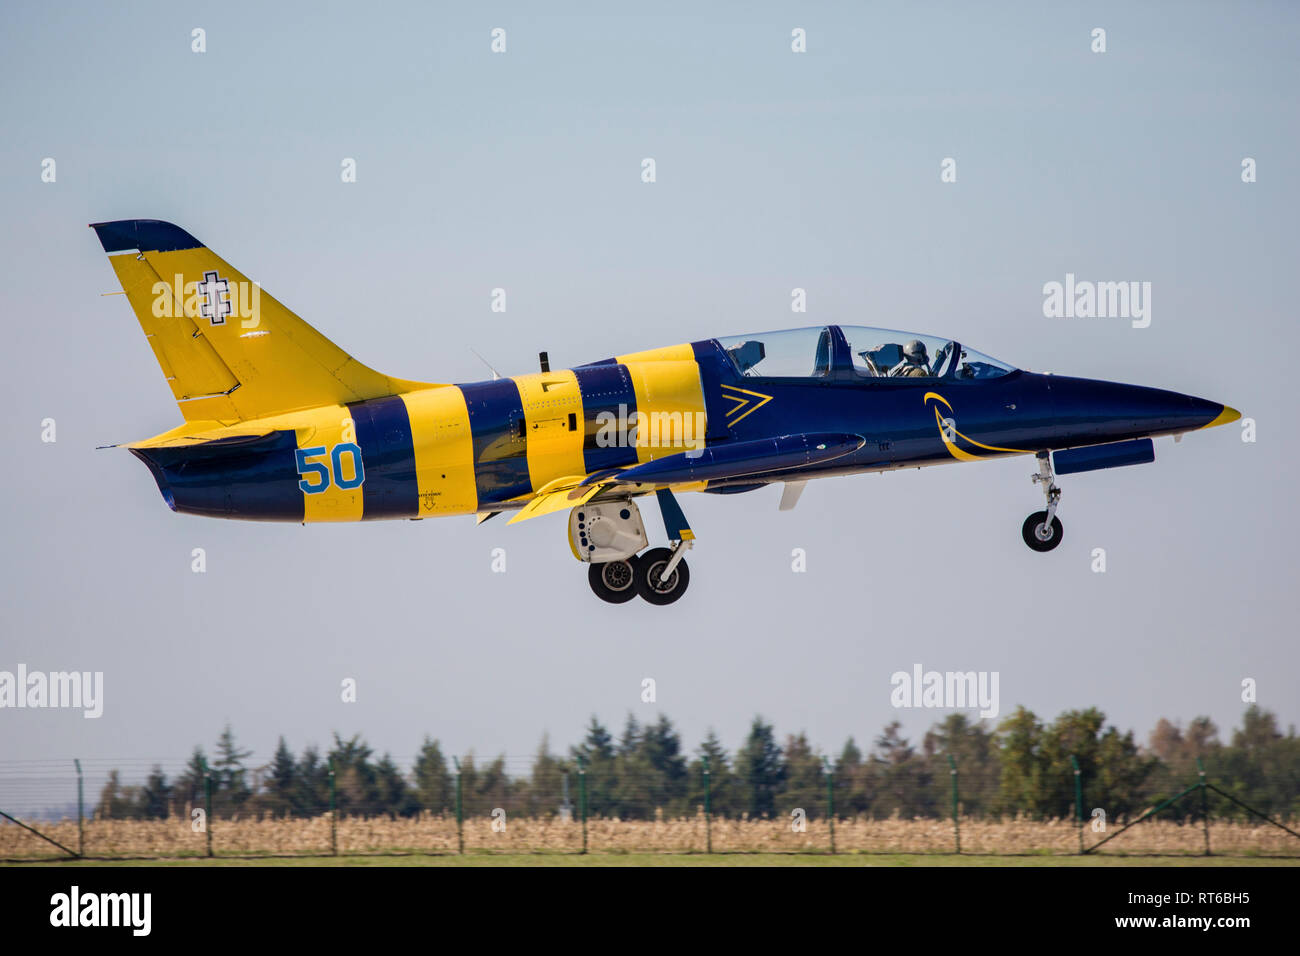 Lithuanian Air Force L-39C taking off. Stock Photo